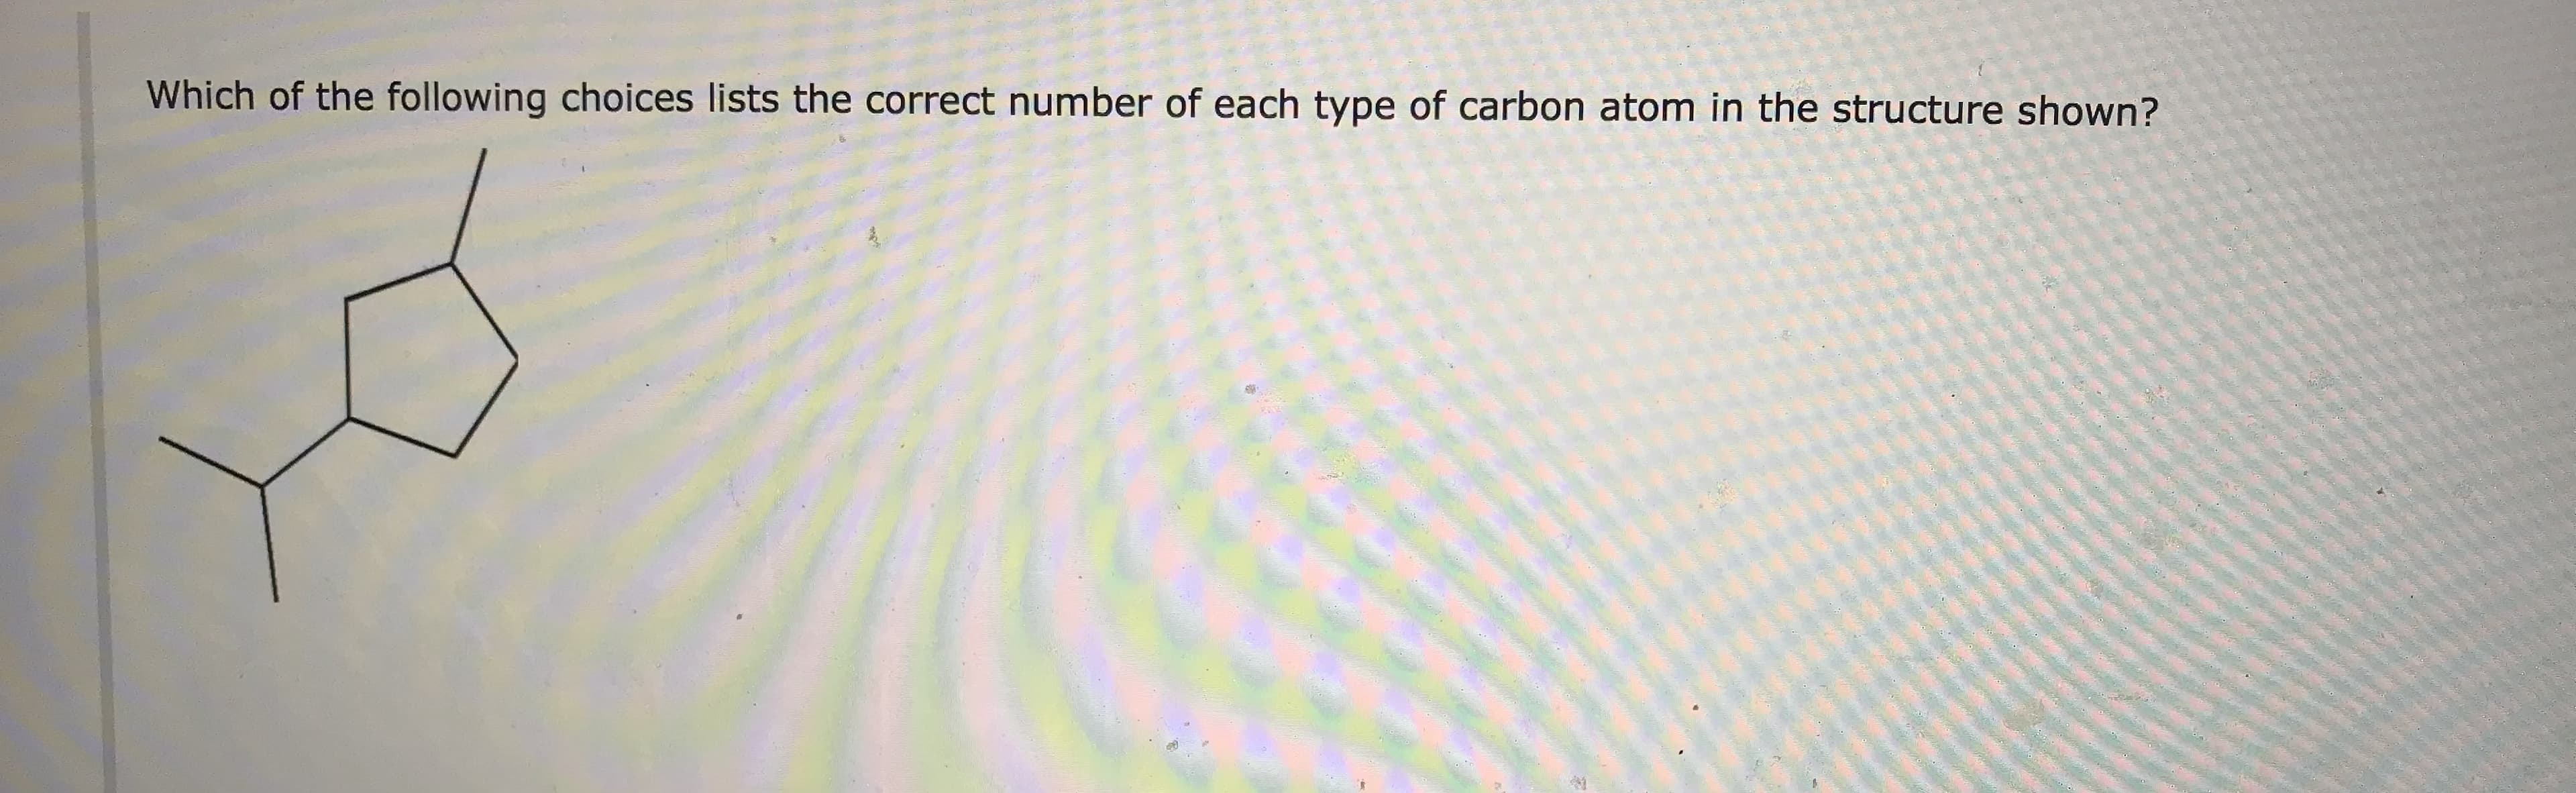 Which of the following choices lists the correct number of each type of carbon atom in the structure shown?
